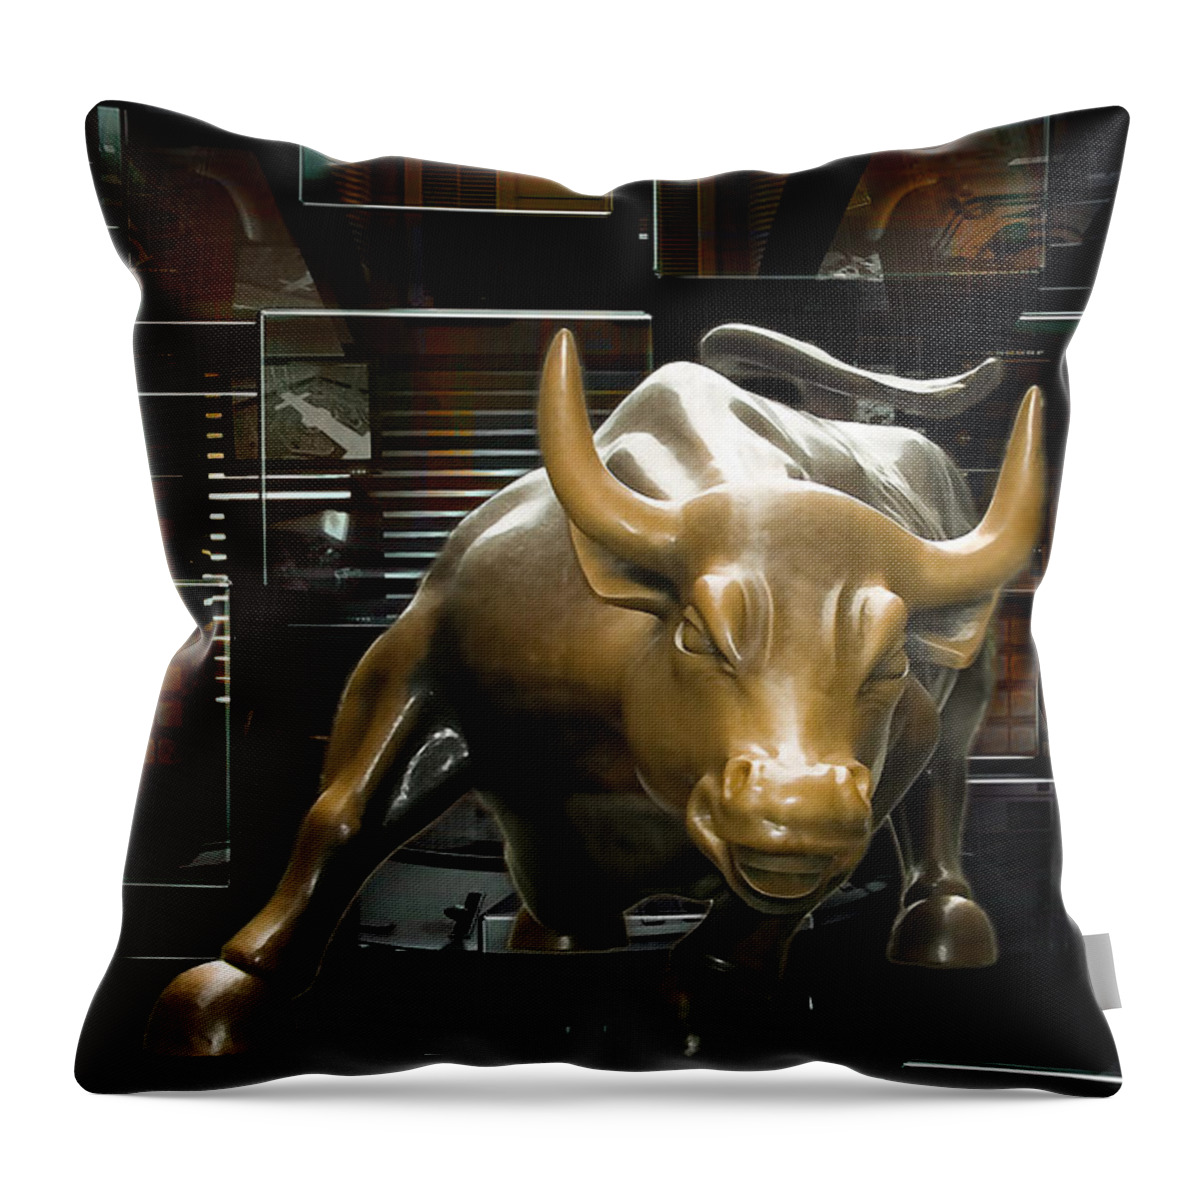 Wall Street Bull Throw Pillow featuring the mixed media Charging Bull by Marvin Blaine